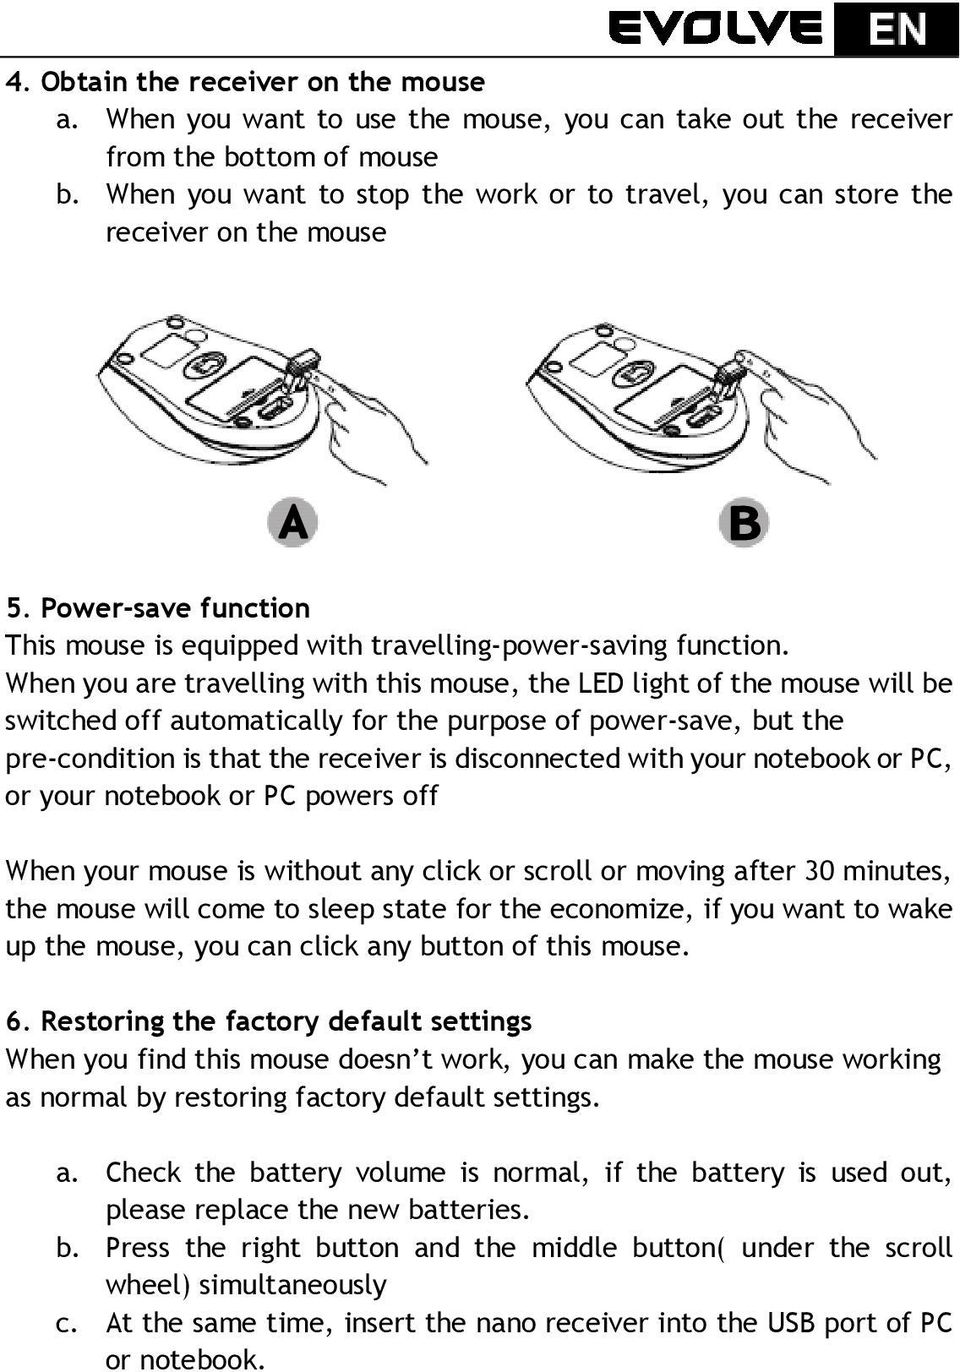 When you are travelling with this mouse, the LED light of the mouse will be switched off automatically for the purpose of power-save, but the pre-condition is that the receiver is disconnected with